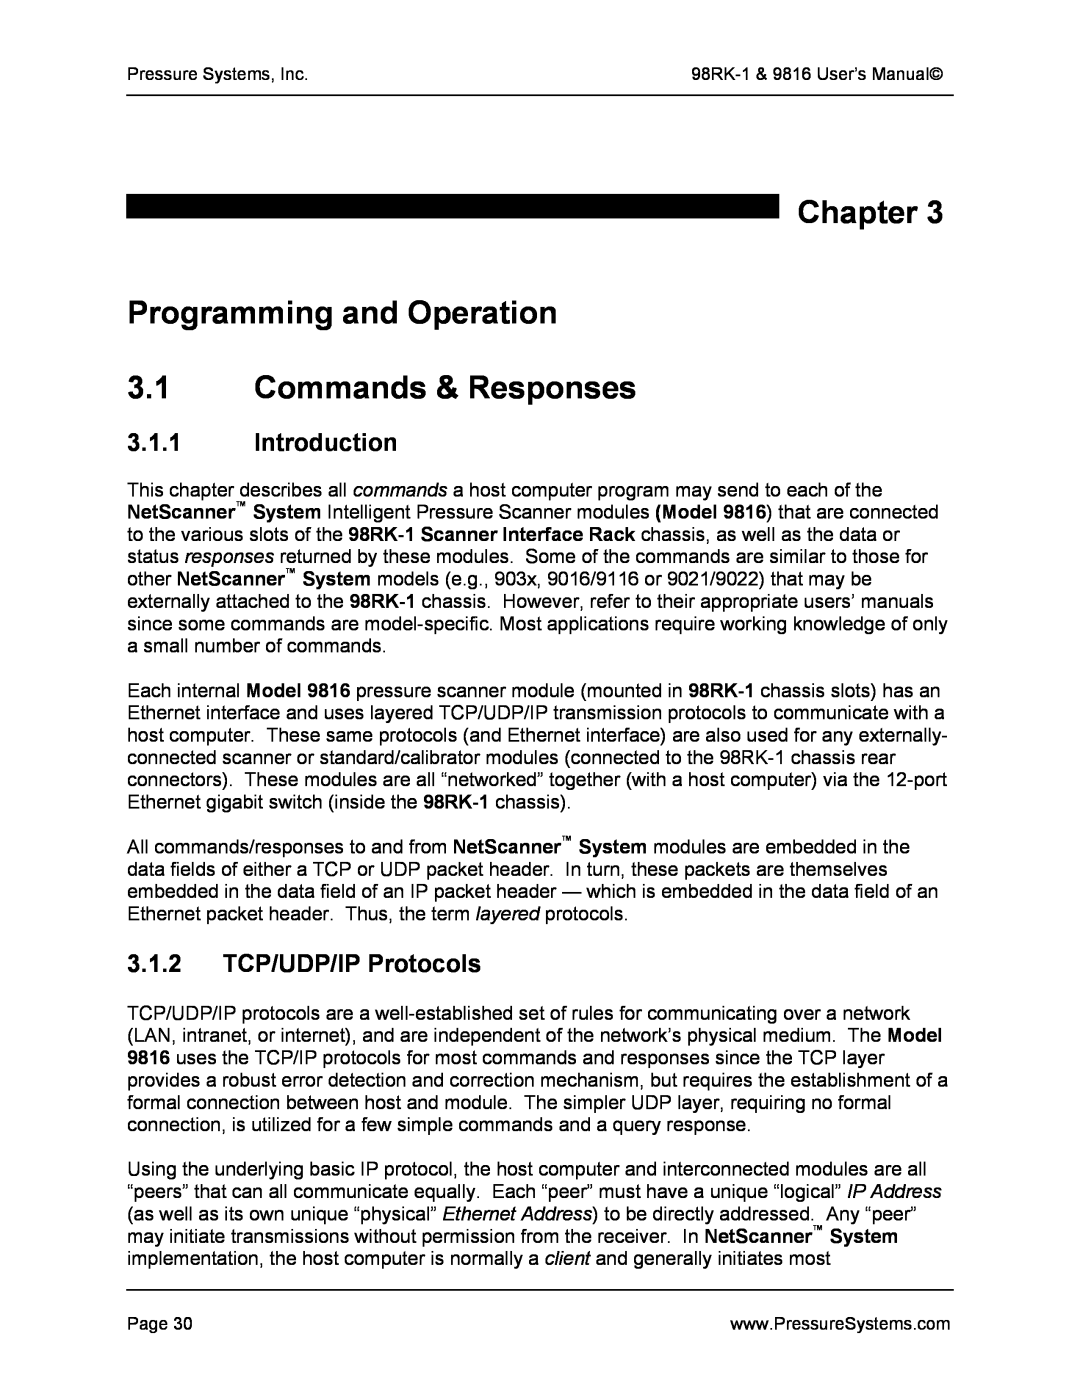 Pressure Systems 98RK-1 user manual Chapter Programming and Operation 3.1 Commands & Responses, Introduction 